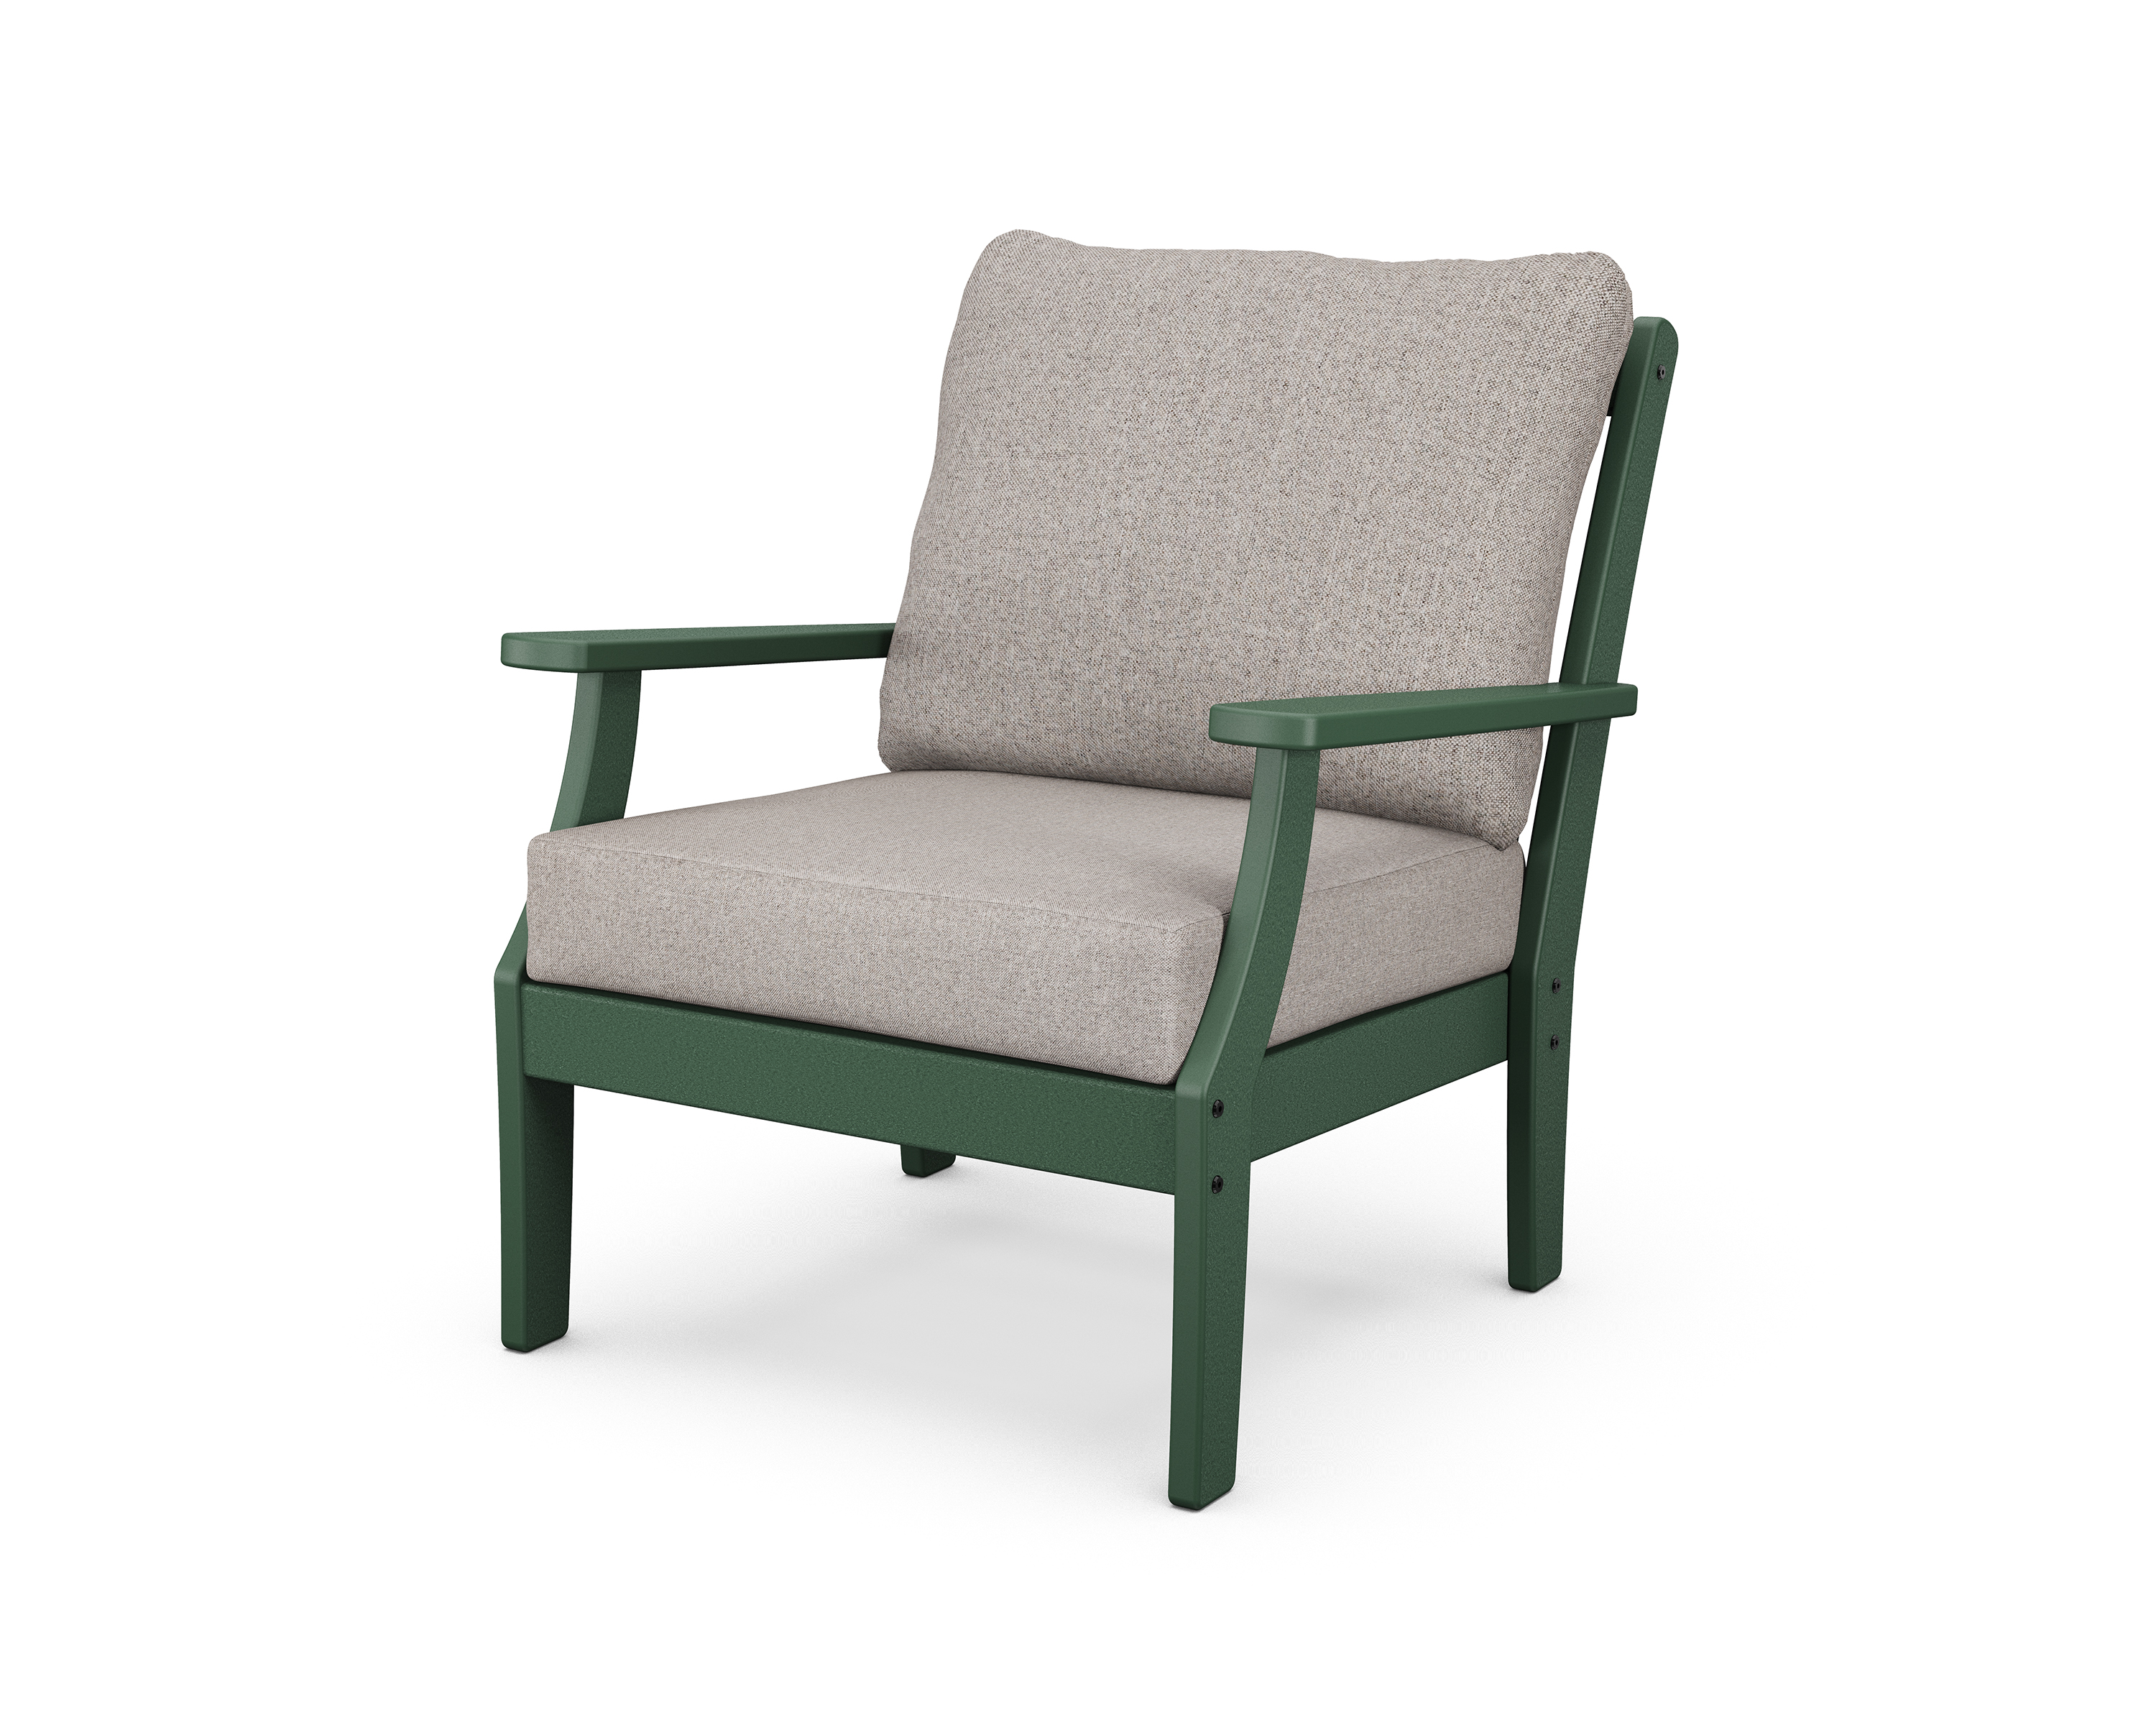 braxton deep seating chair in green / weathered tweed product image